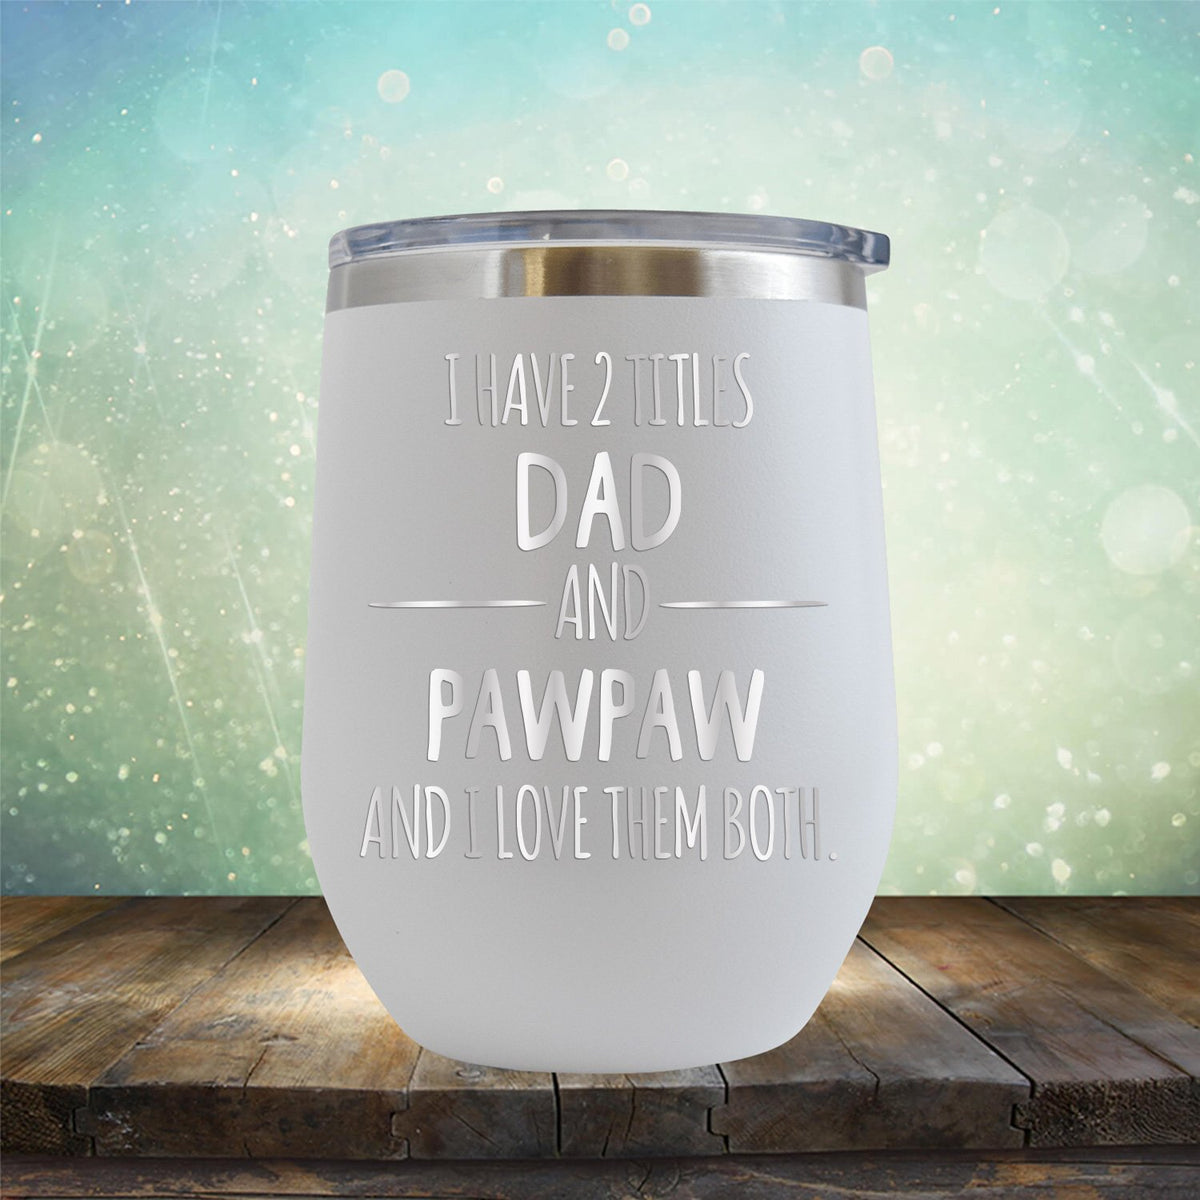 I Have 2 Titles Dad and Pawpaw and I Love Them Both - Stemless Wine Cup